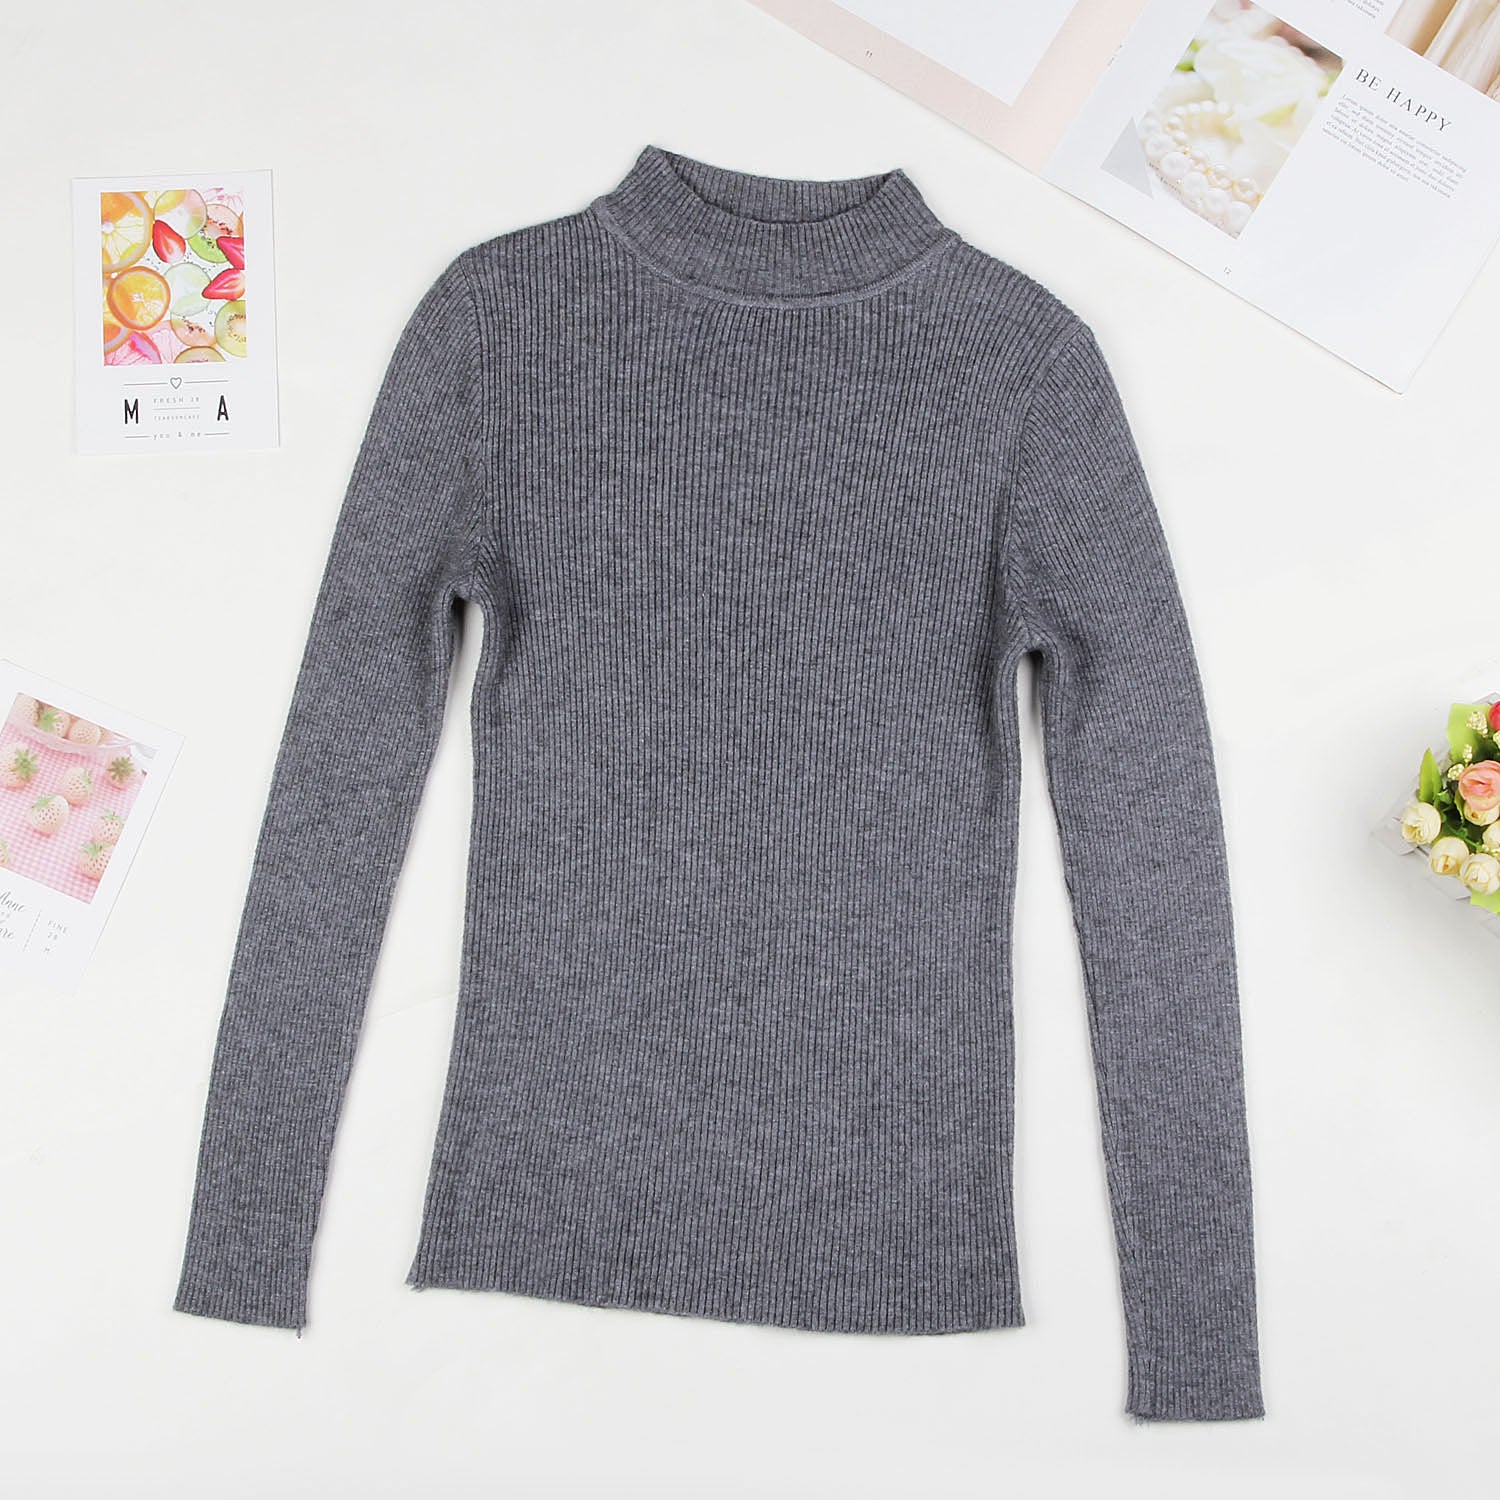 Fall New Women Turtleneck Sweater Pullover Knitted Slim Tops Casual - SixtyKey new model design Dubai fashion style 2021 best price